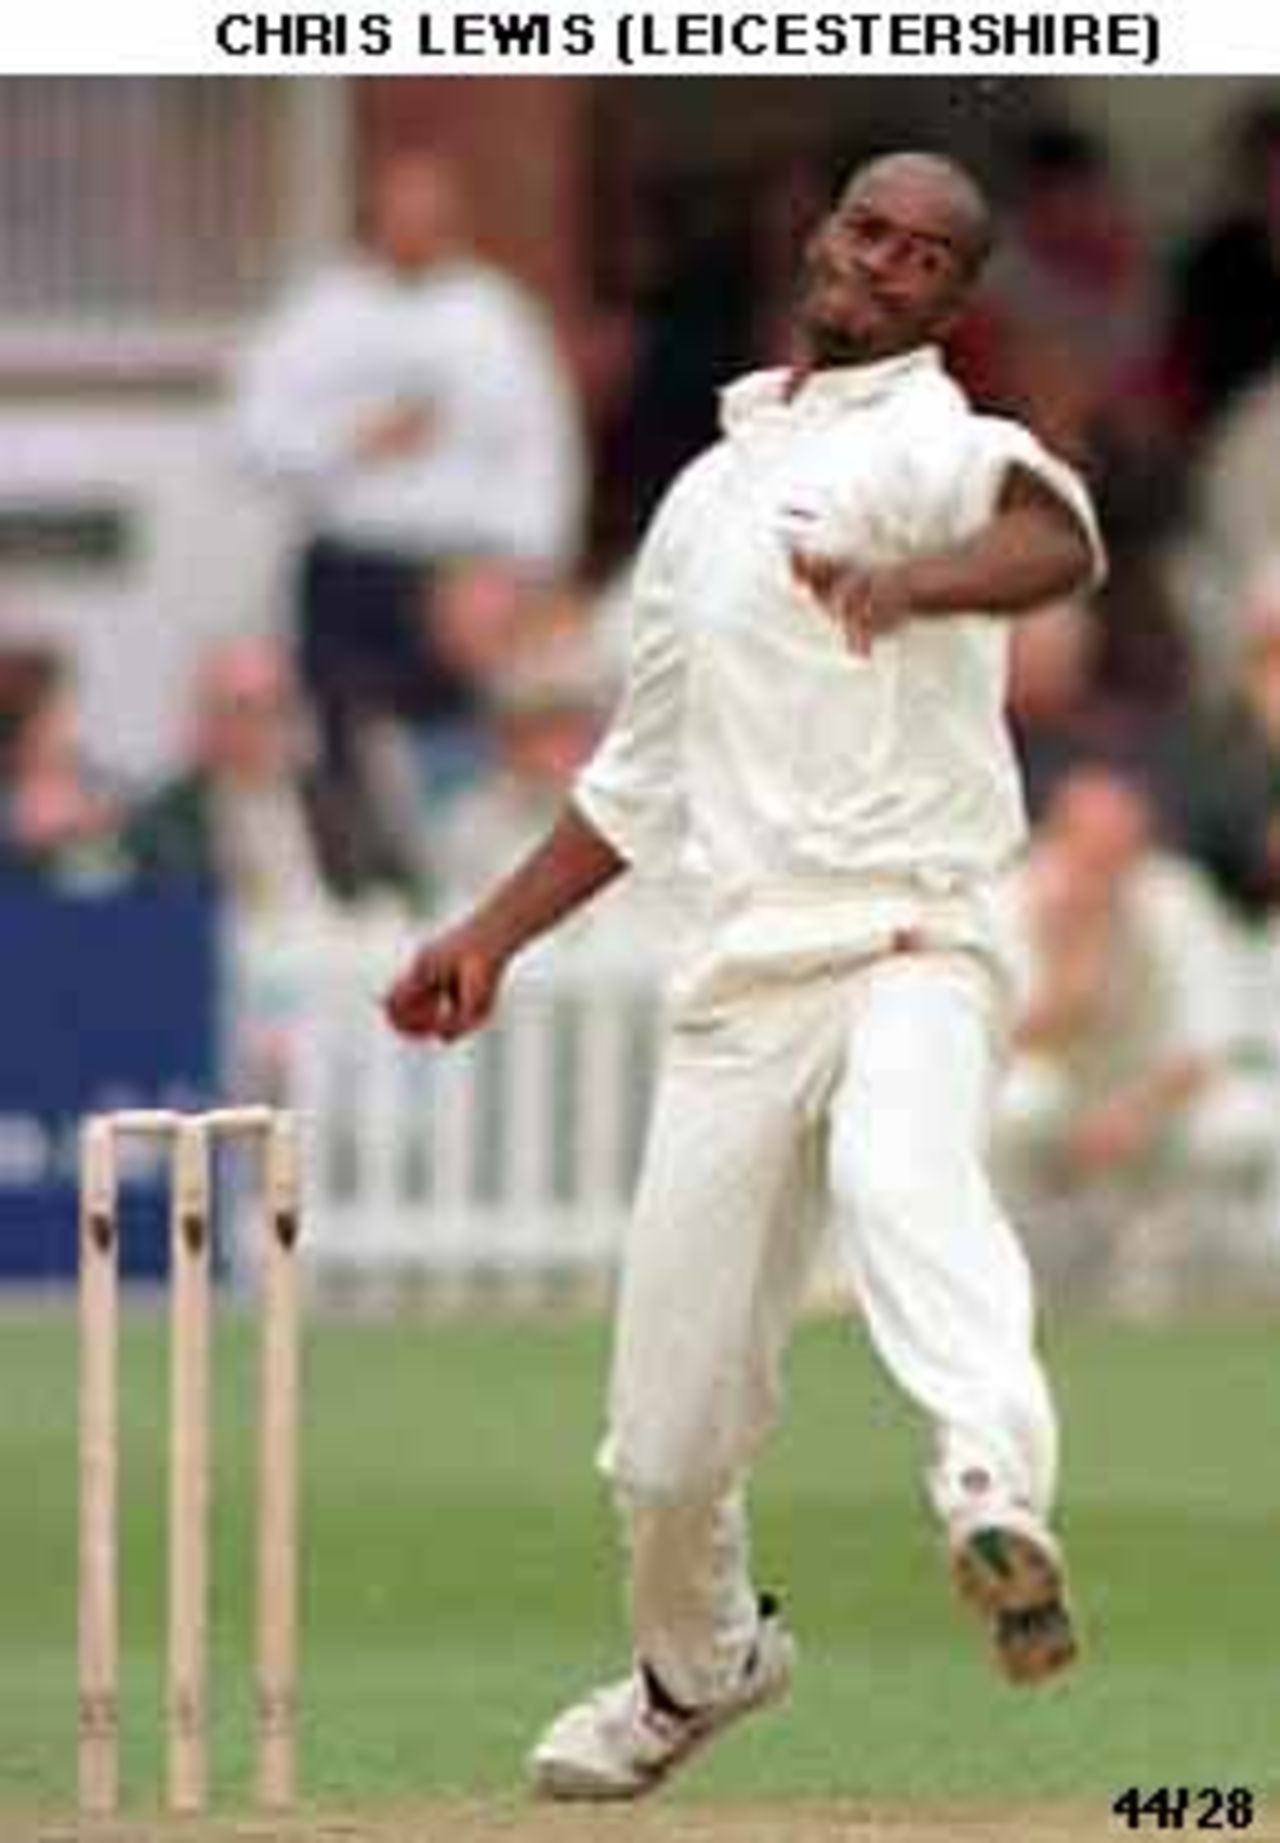 Chris Lewis of Leicestershire about to deliver the ball